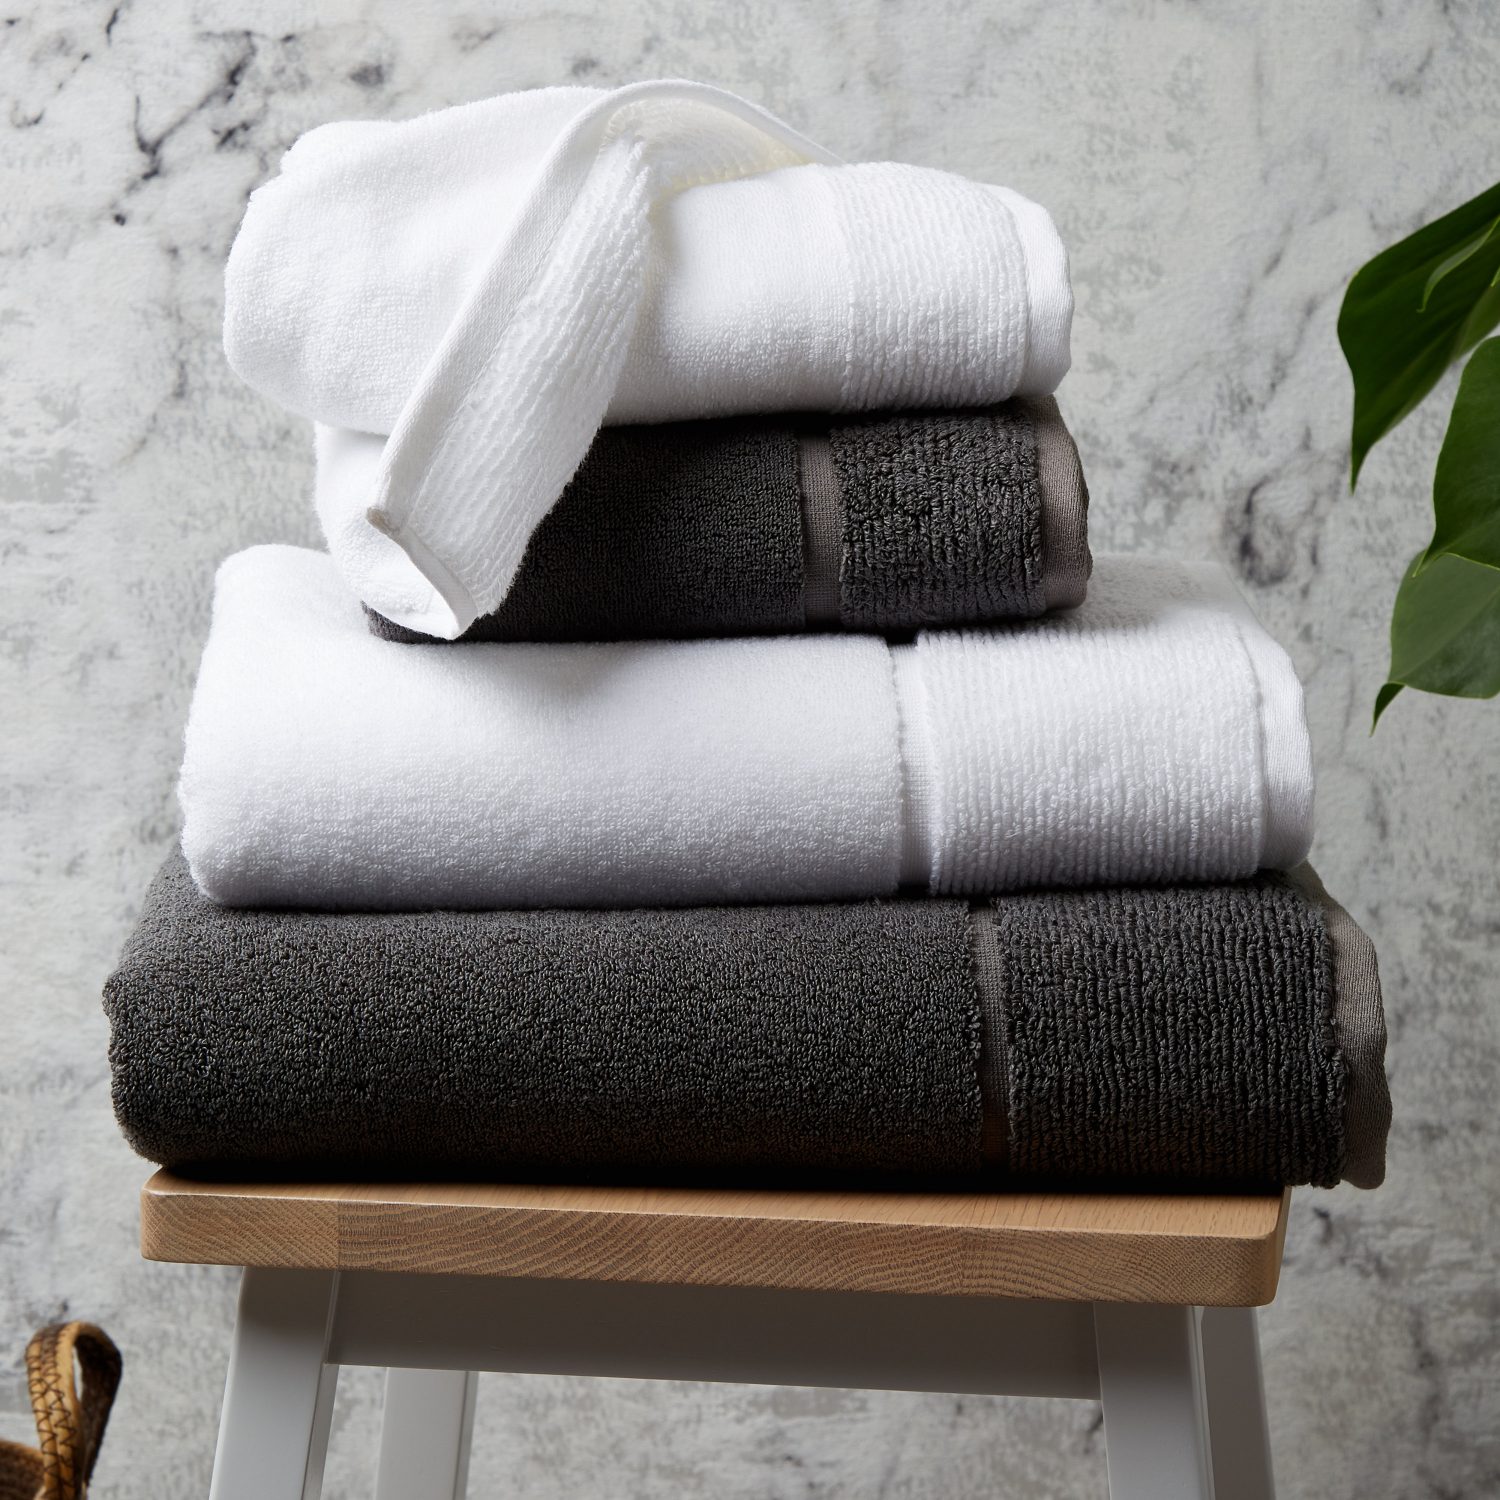 https://pandalondon.com/wp-content/uploads/2019/11/Bamboo-Towels-Folded-Pure-White-and-Urban-Grey-Website-Listing-e1623787780261.jpg